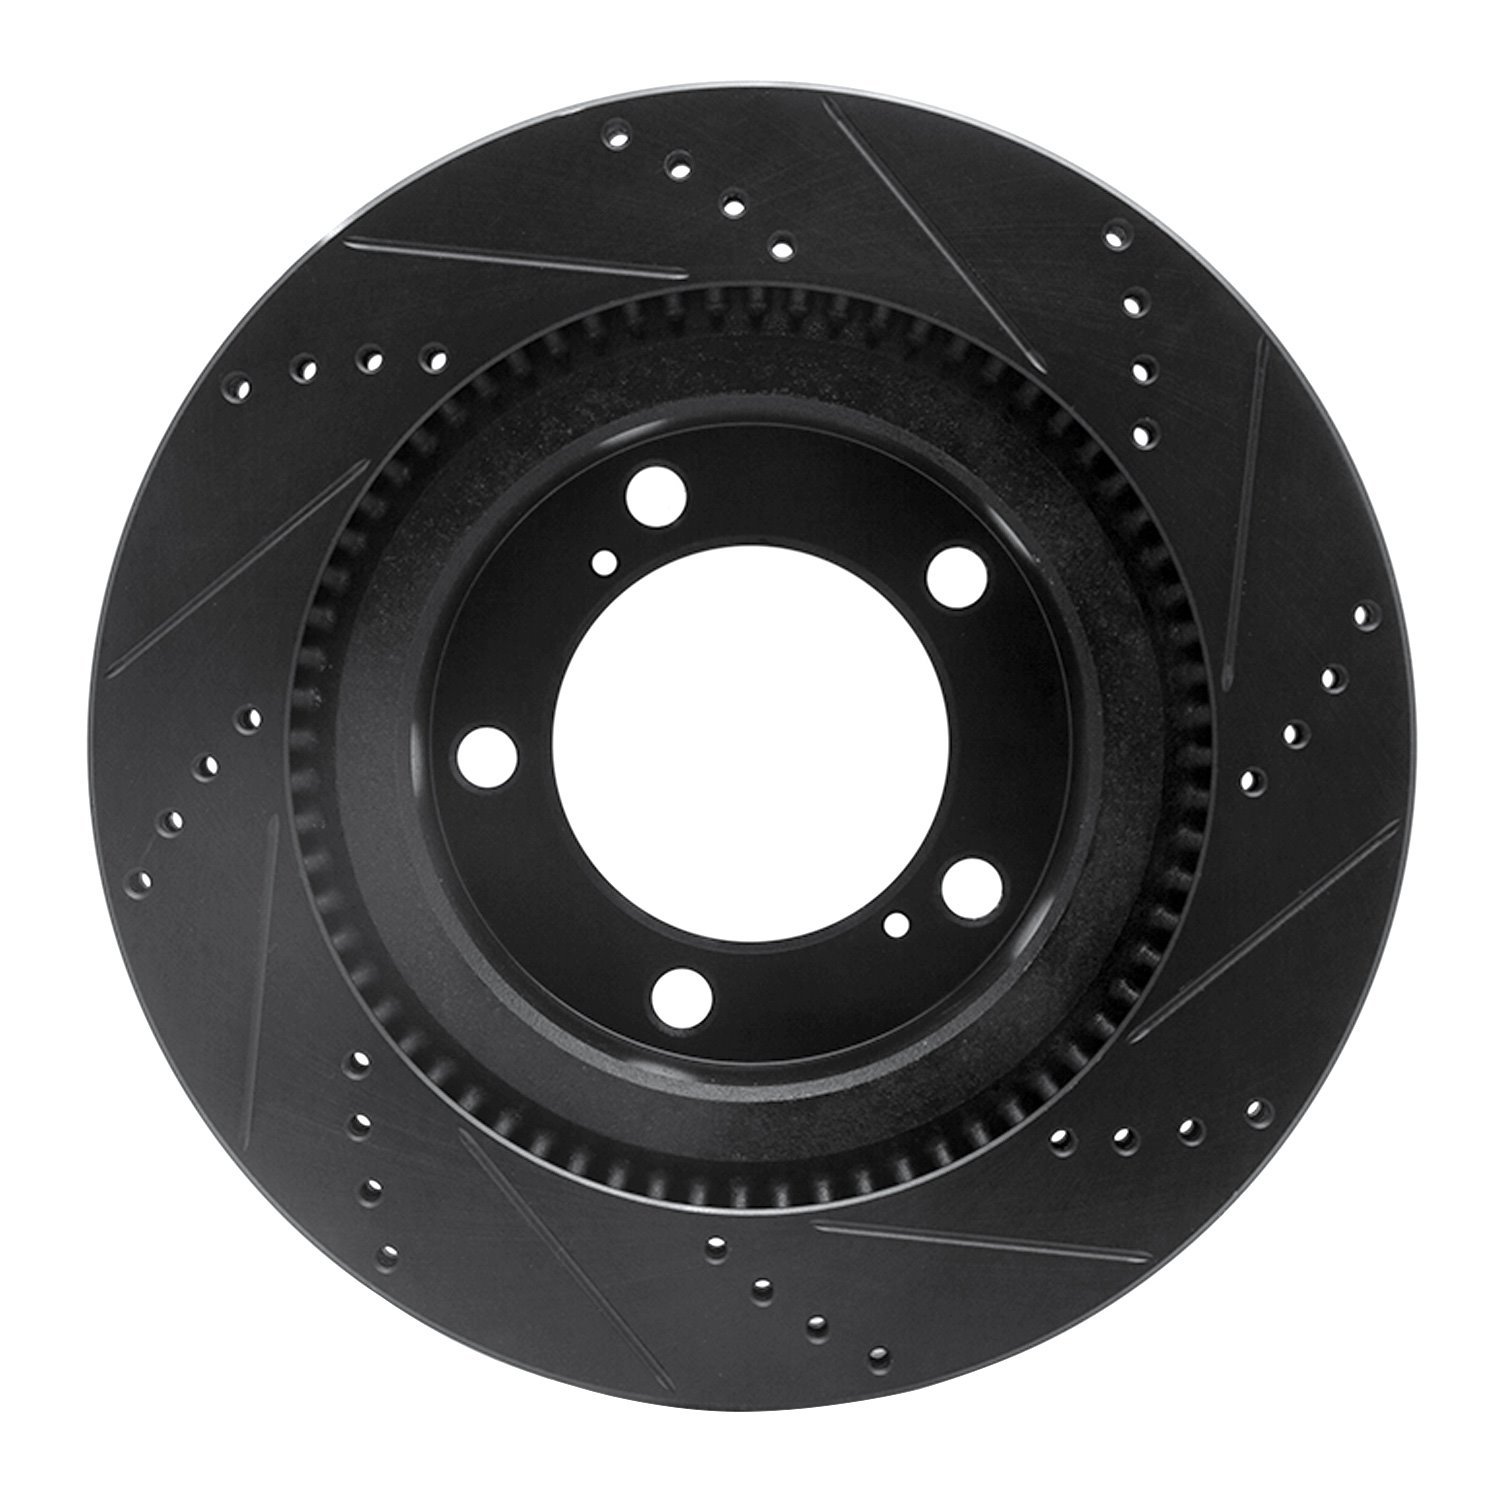 E-Line Drilled & Slotted Black Brake Rotor, Fits Select Lexus/Toyota/Scion, Position: Front Left